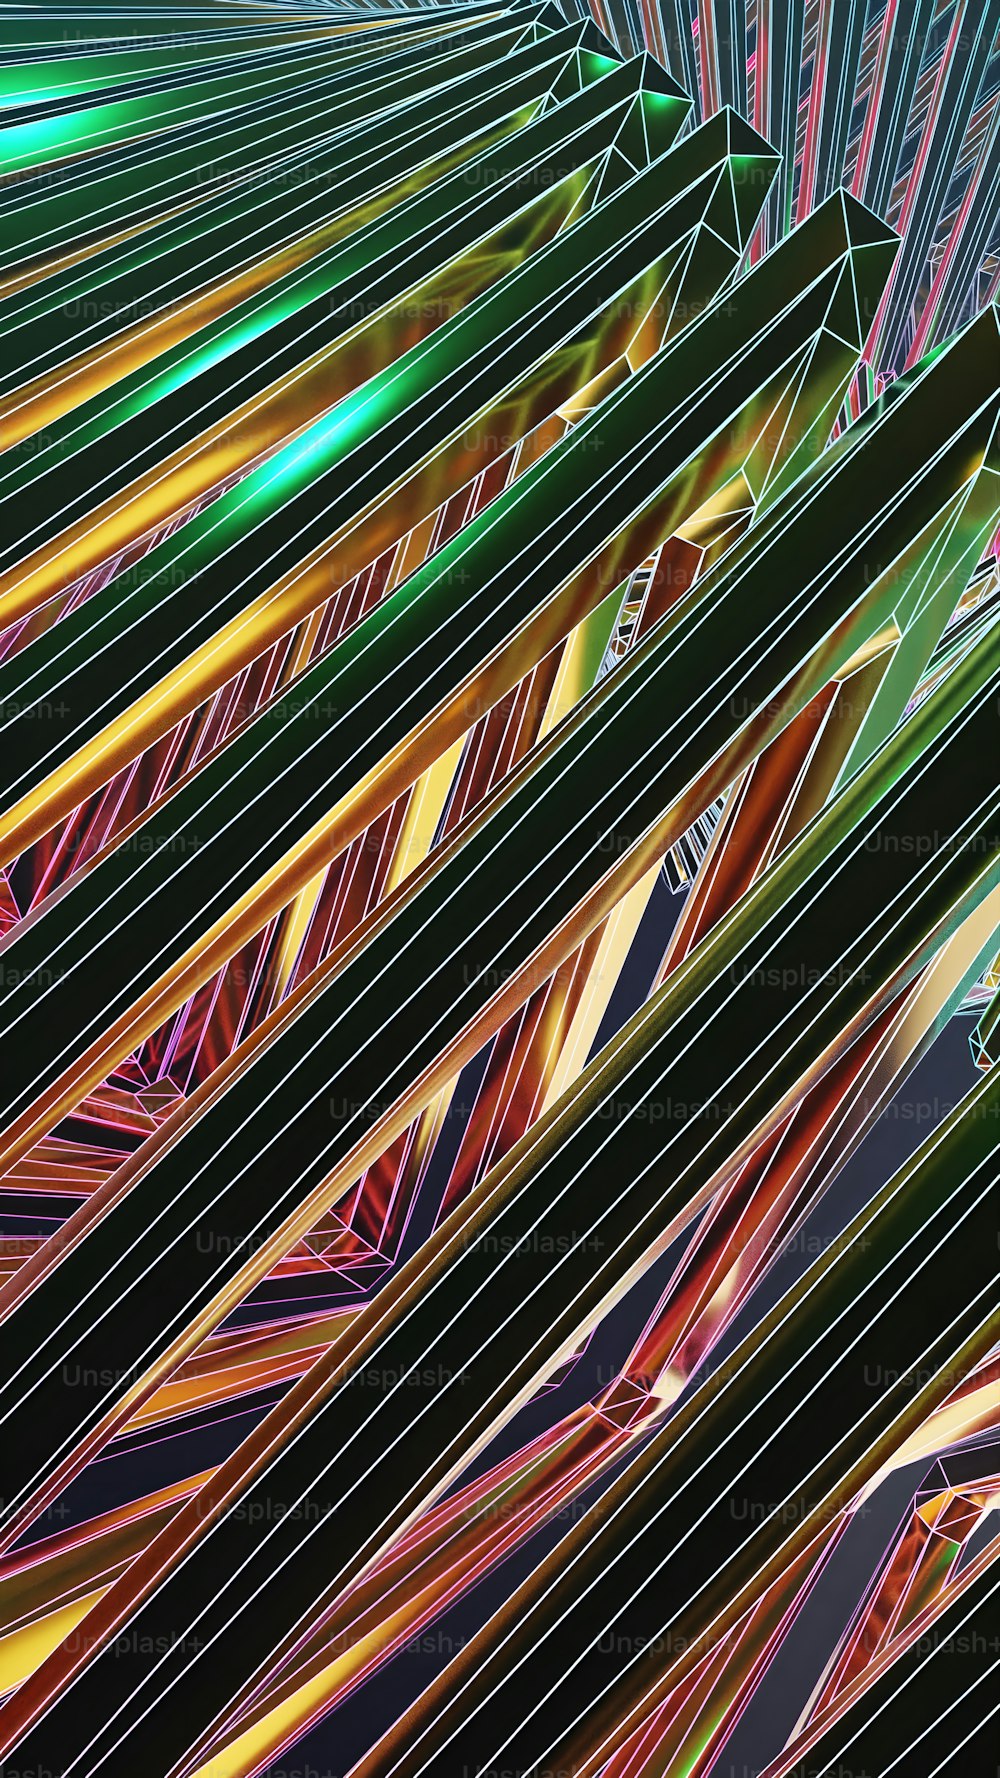 an abstract image of lines and shapes